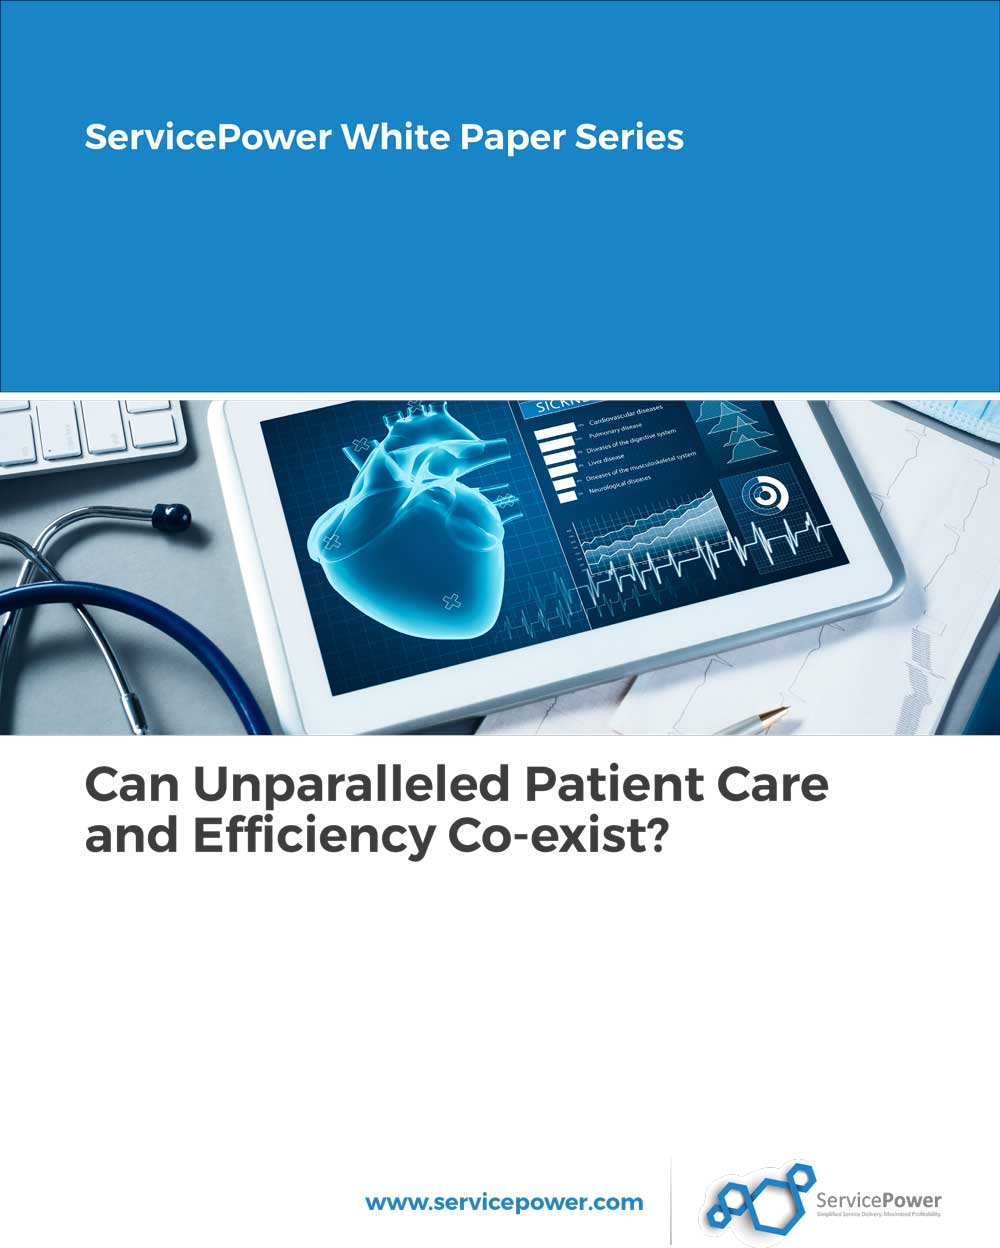 Download: Can Unparalleled Patient Care and Efficiency Co-exist?